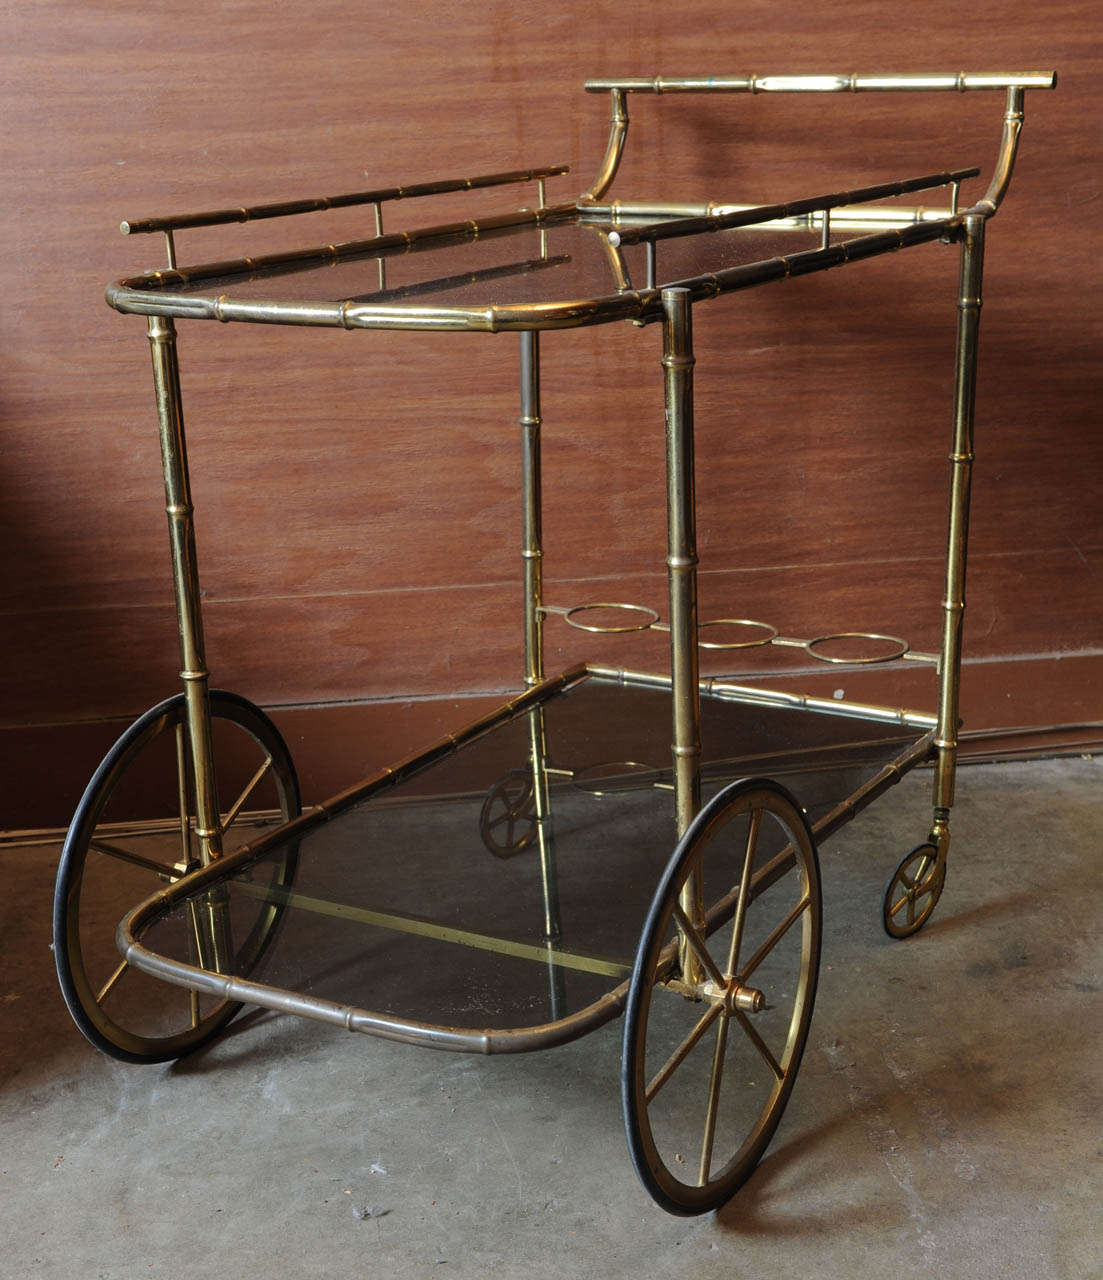 Wonderful bar cart tea trolley made of copper plated bamboo and smokes glass tops